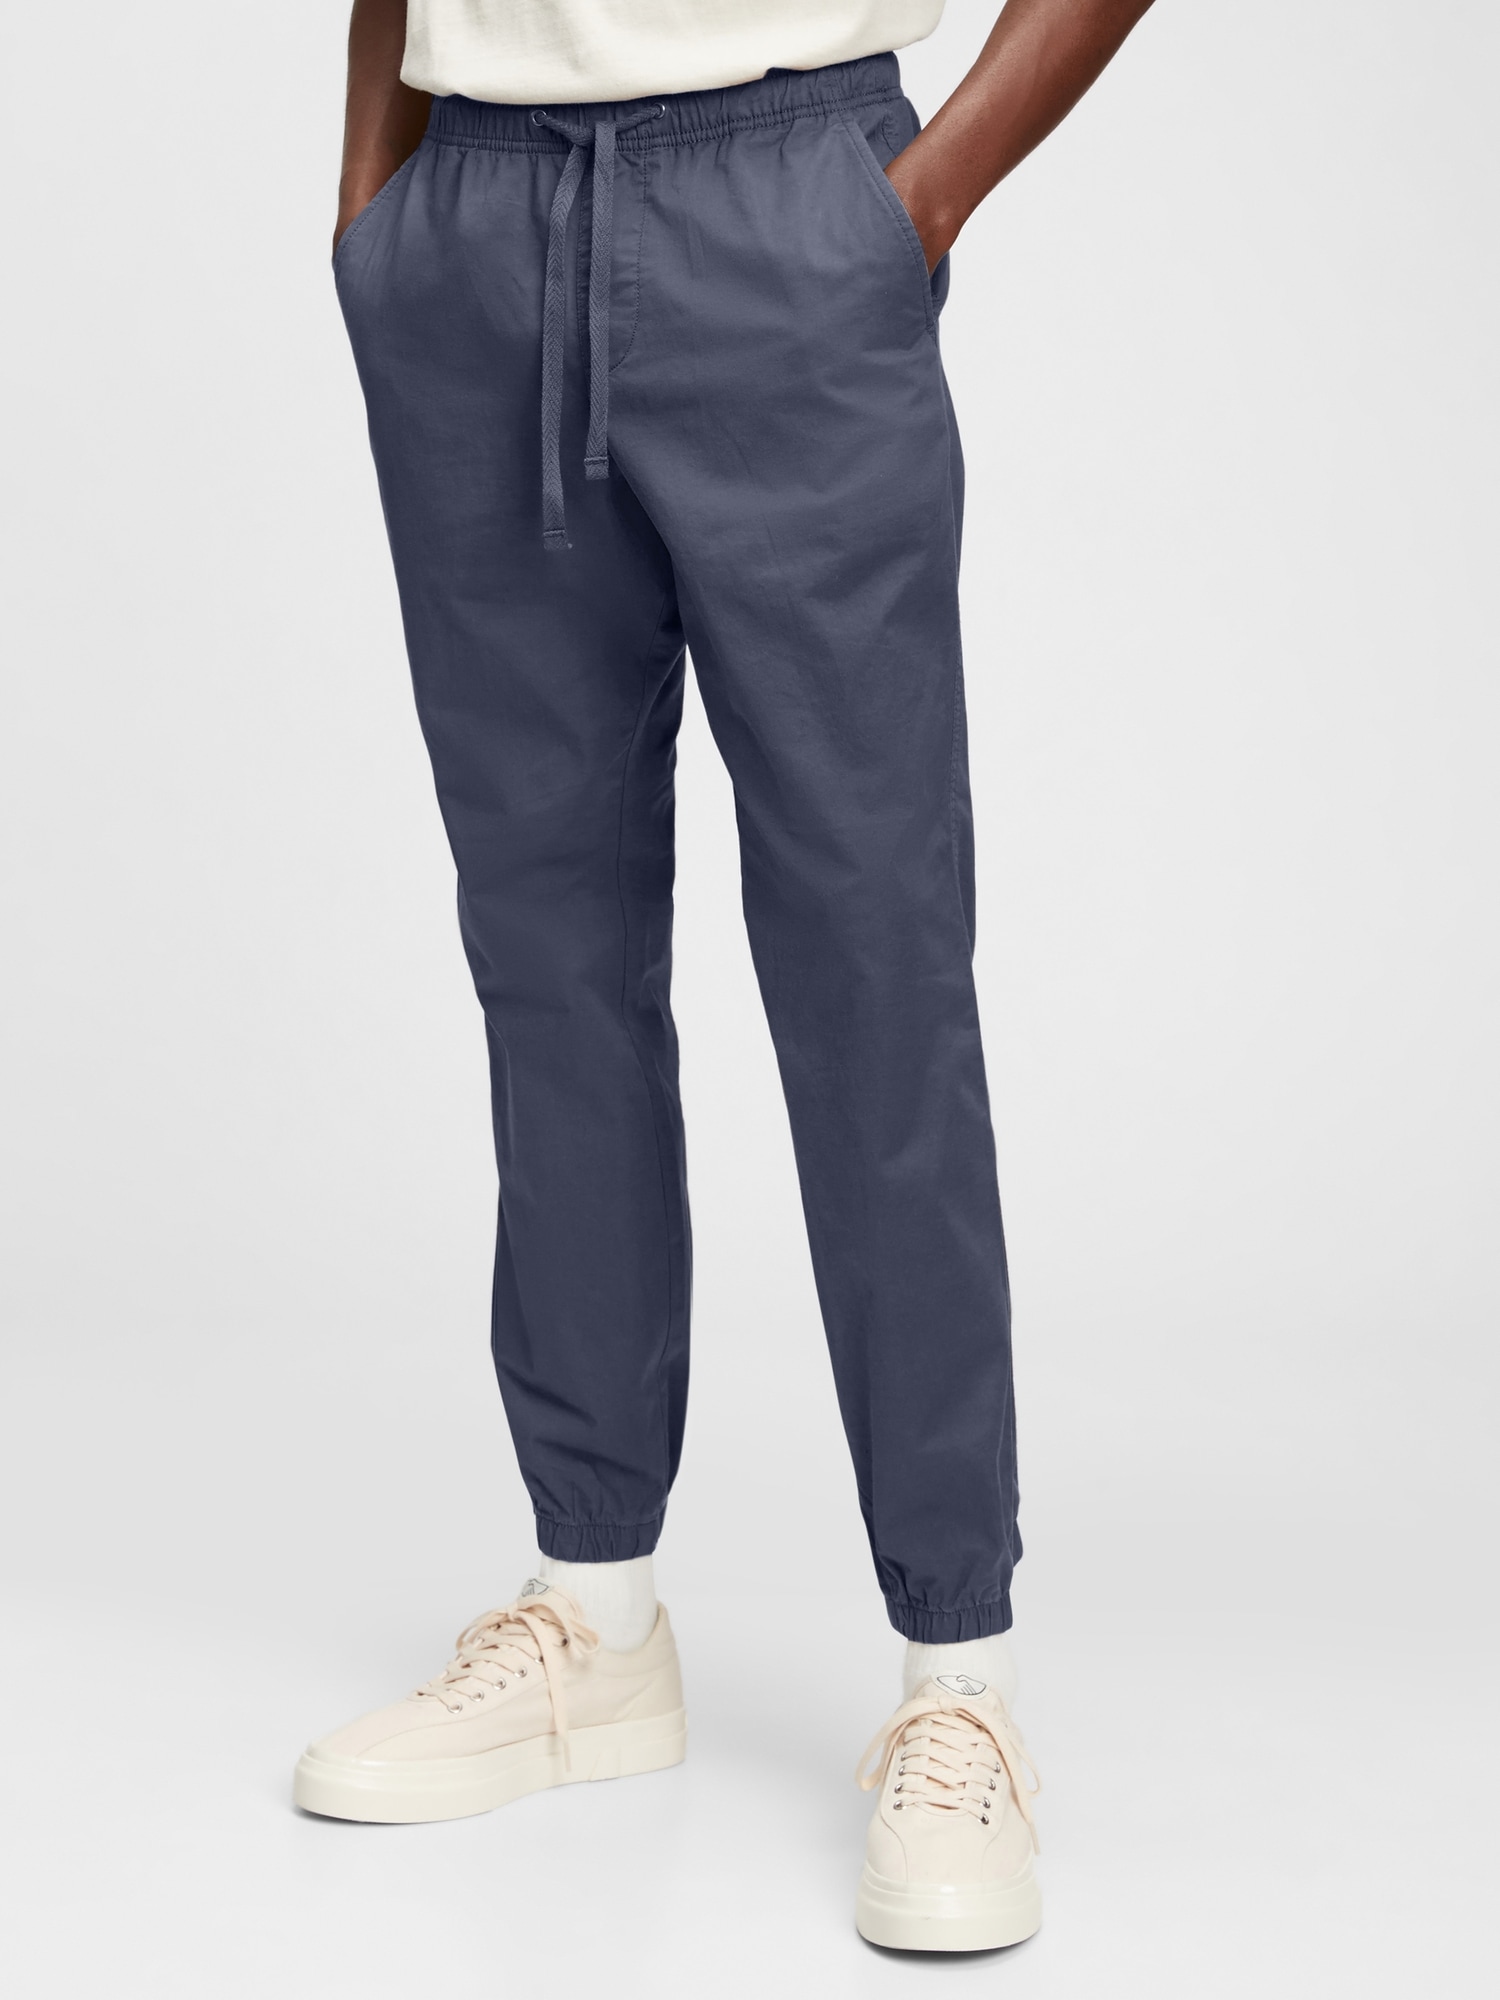 Buy Yellow Track Pants for Men by GAP Online | Ajio.com